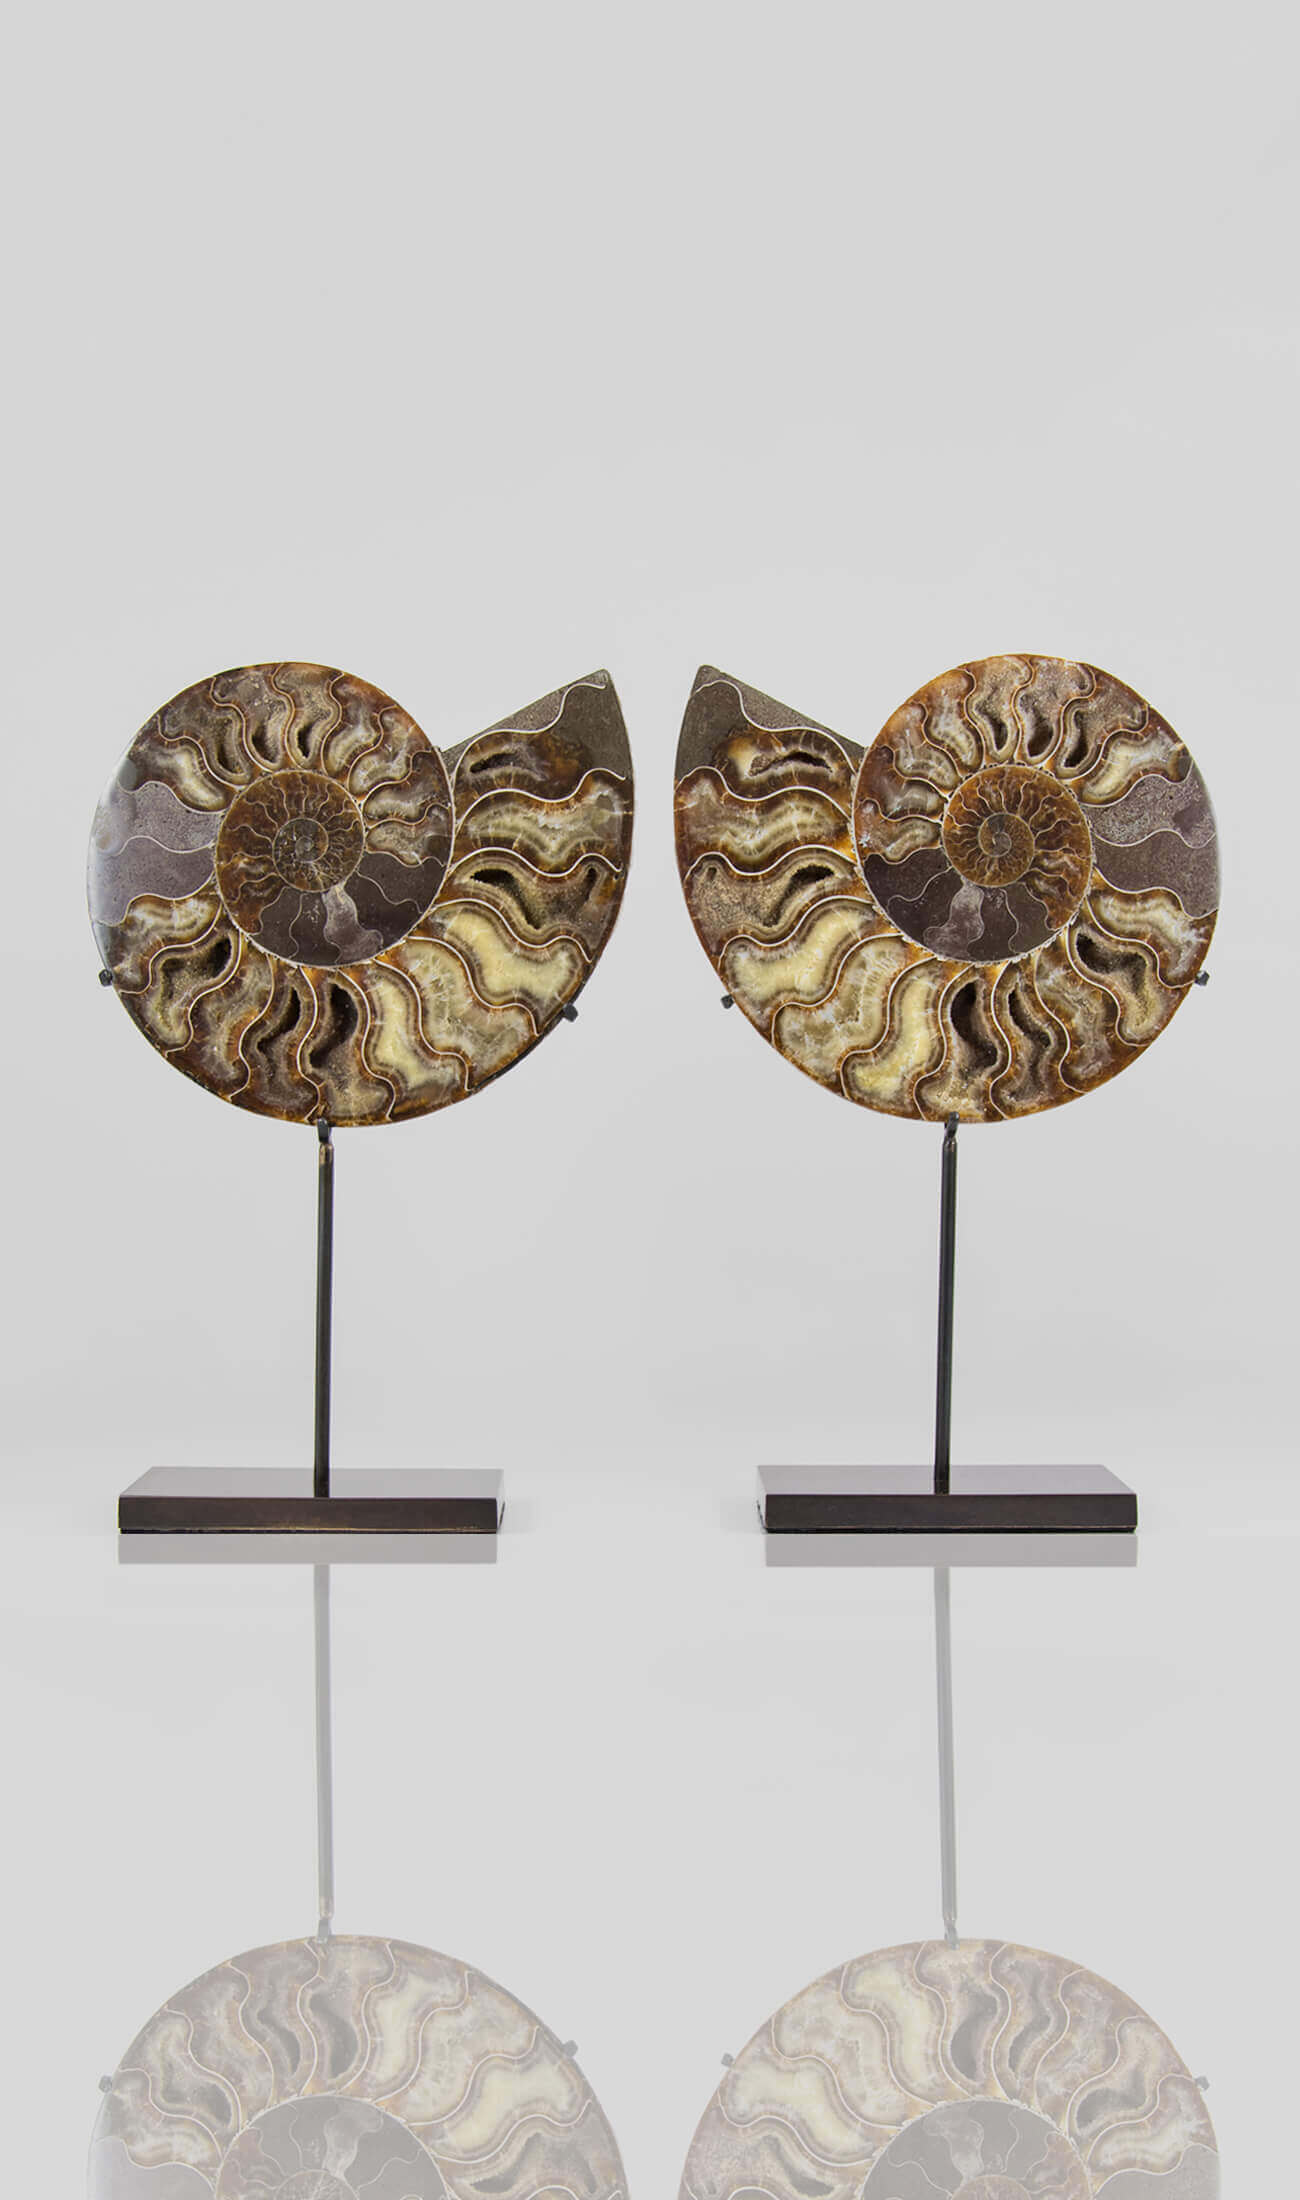 Beautifully presented pair of Cleoniceras ammonite fossils for sale measuring 237mm on our custom designed bronze stands